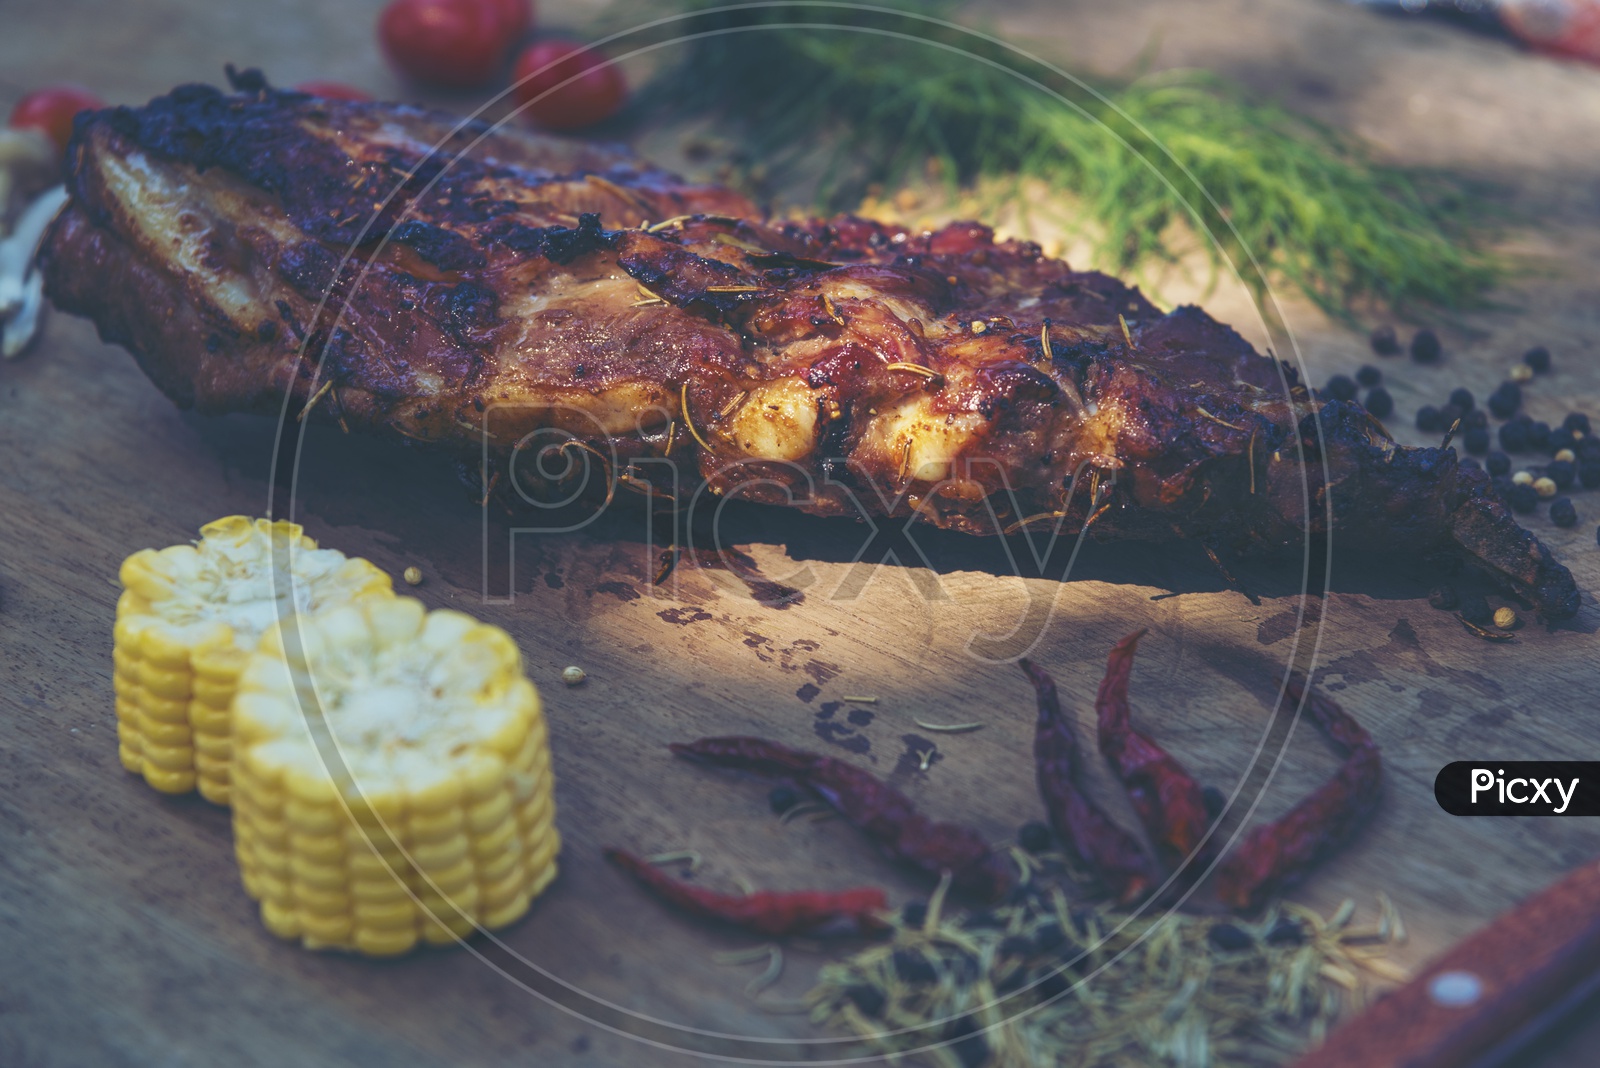 Fresh piece of pork ribs, Tomatoes, red chillis, pepper and herbs on a wooden cutting board